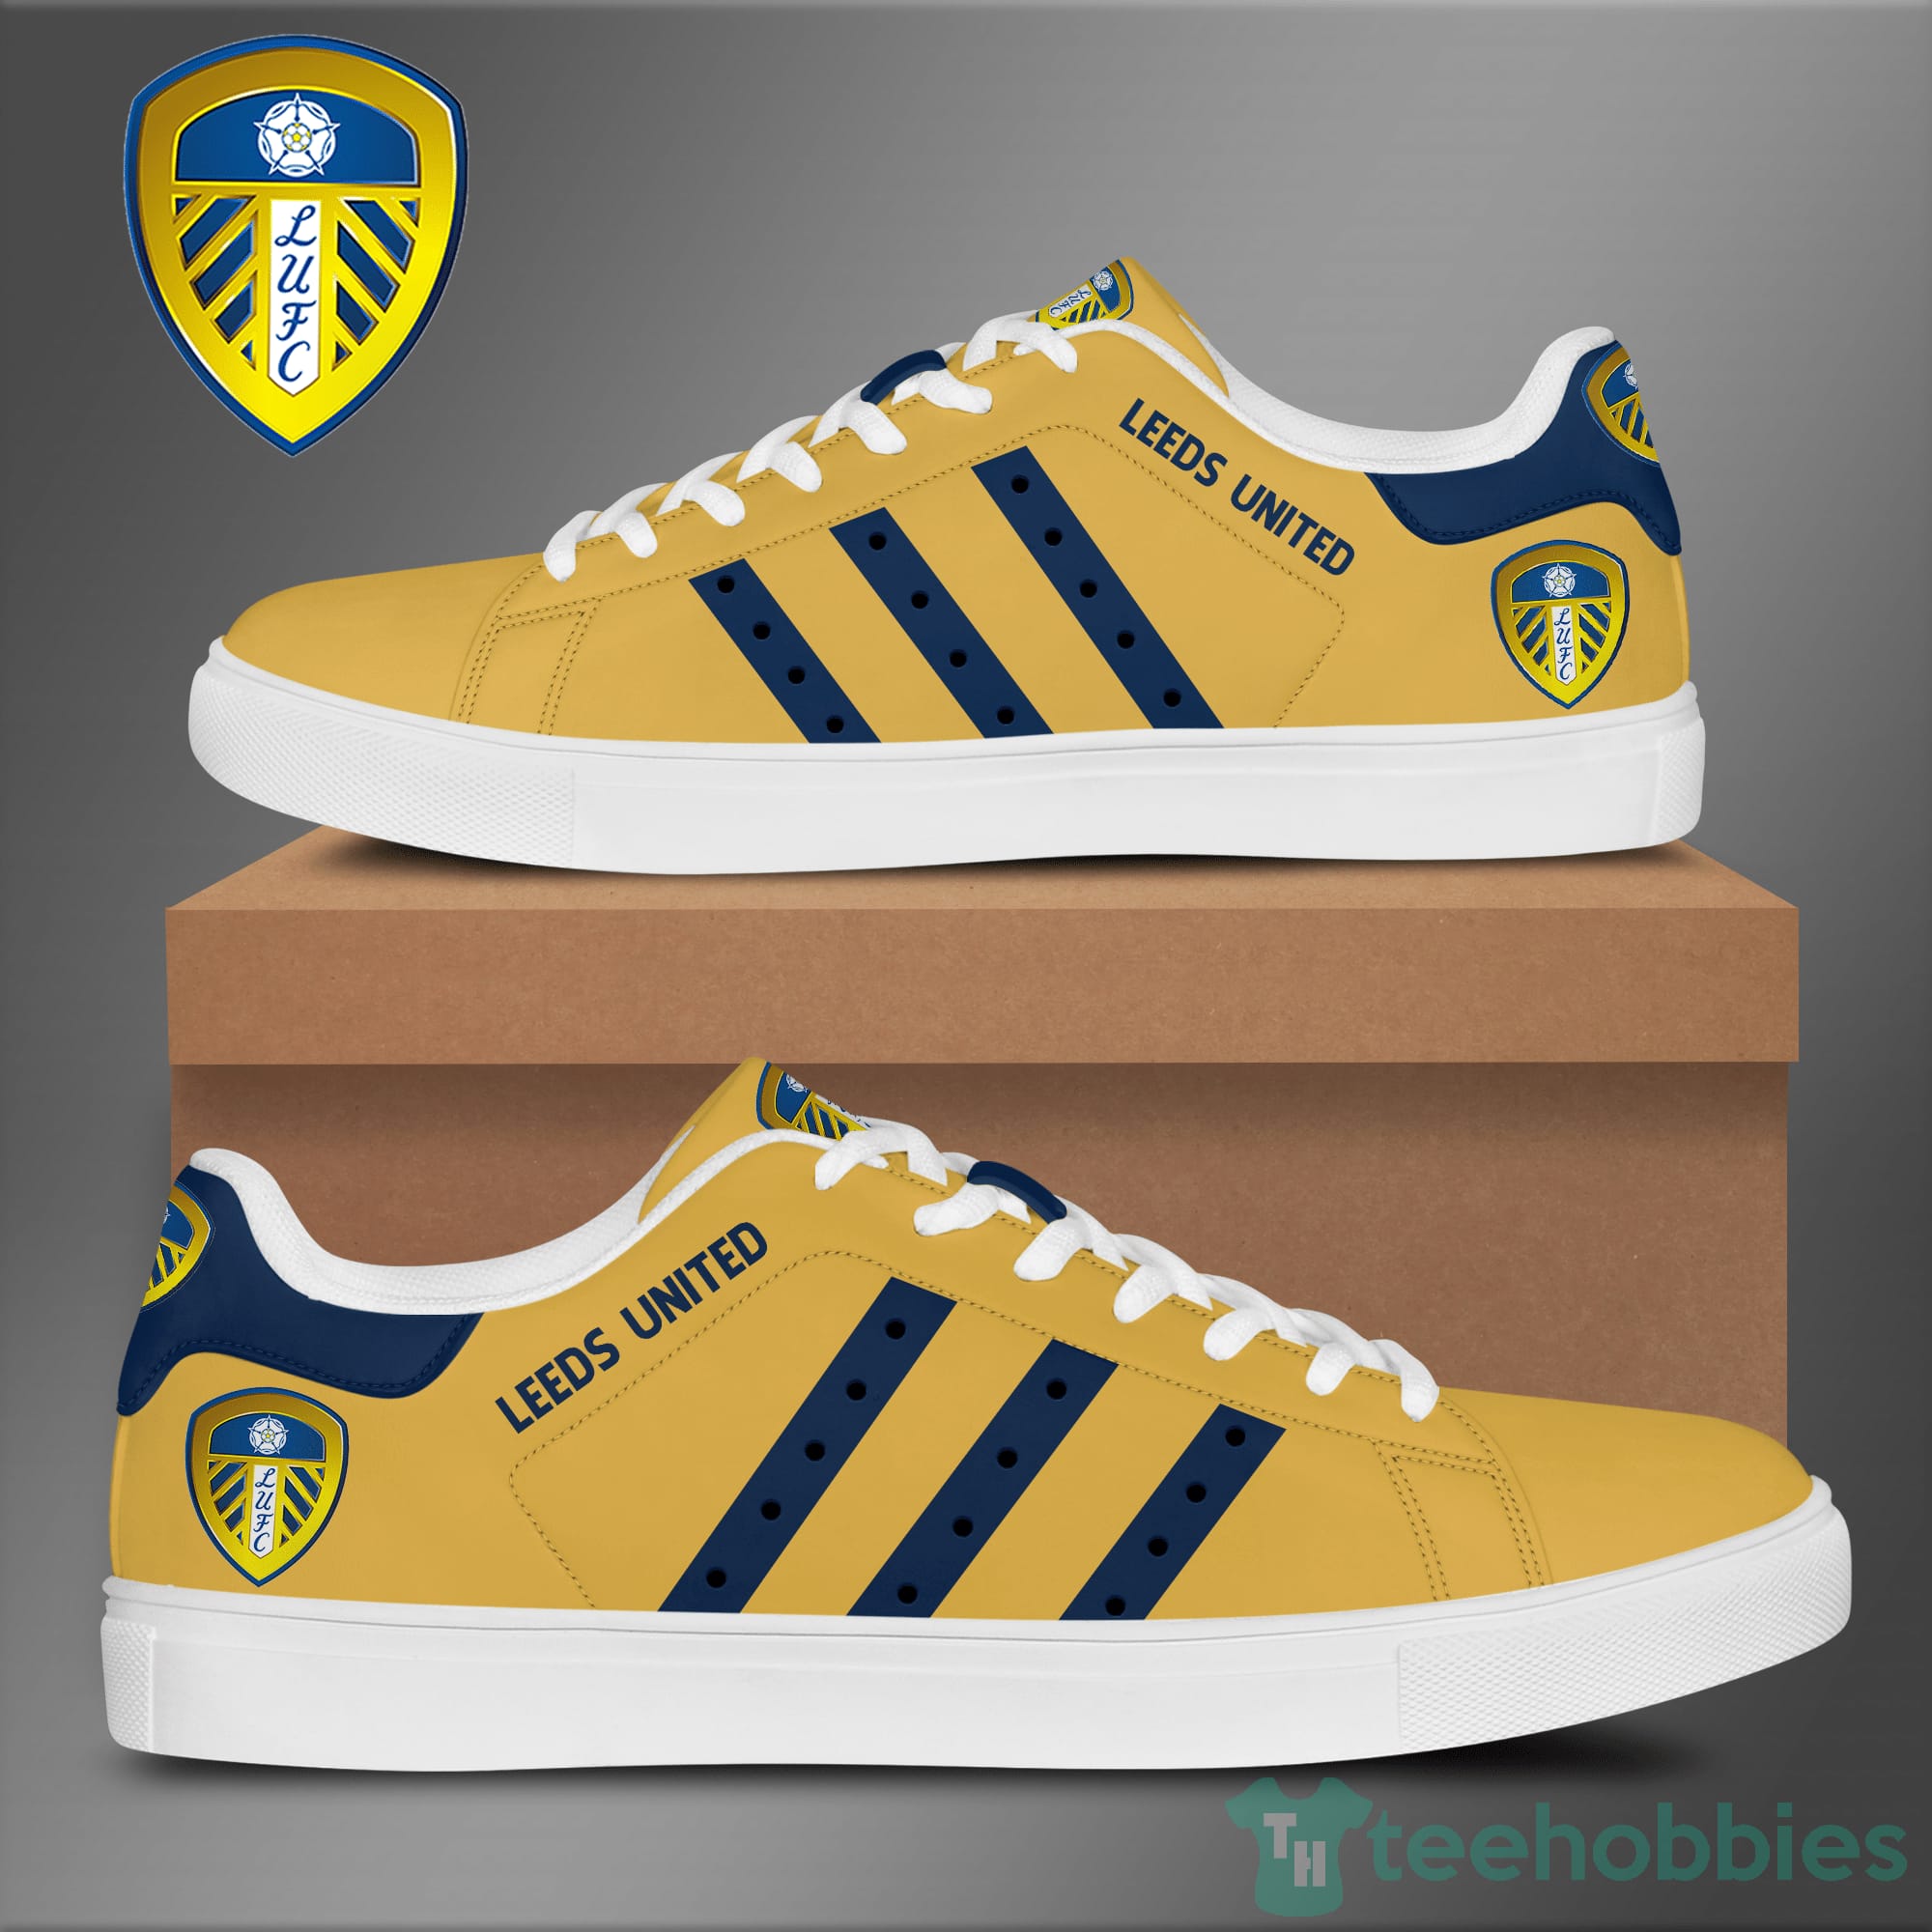 Leeds United Logo Low Top Skate Shoes Product photo 1